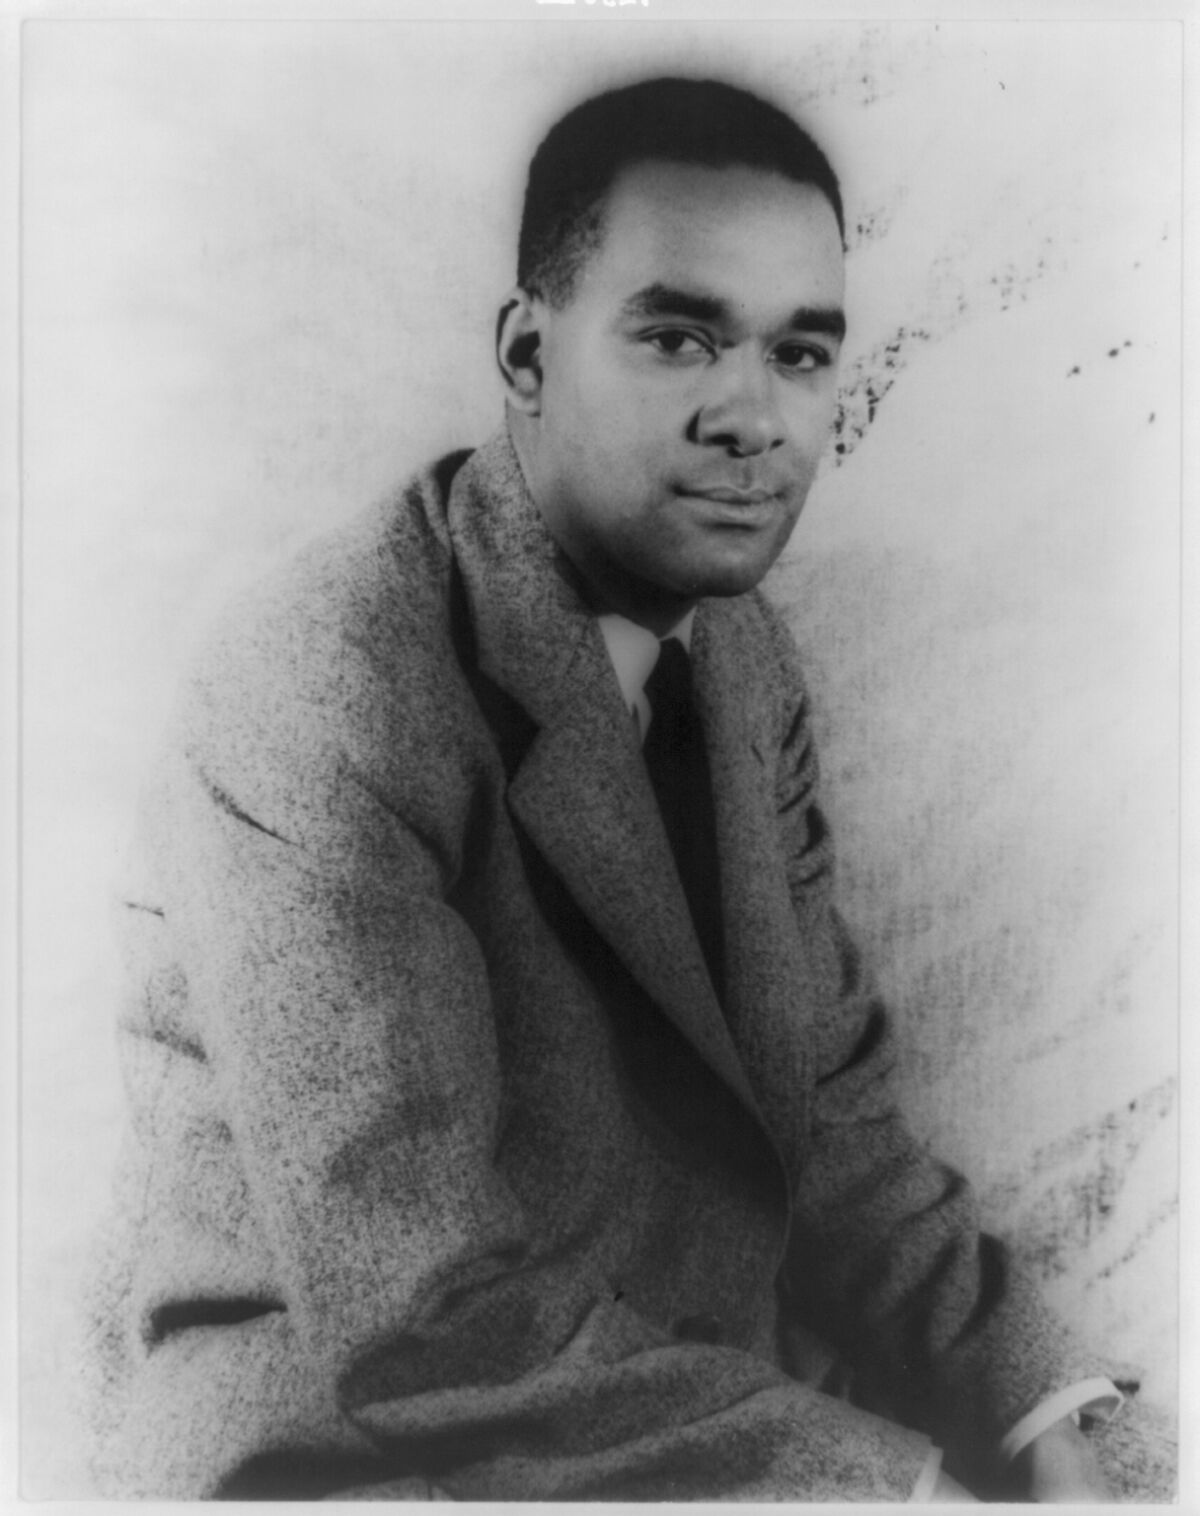 A photograph of Richard Wright, wearing a suit jacket